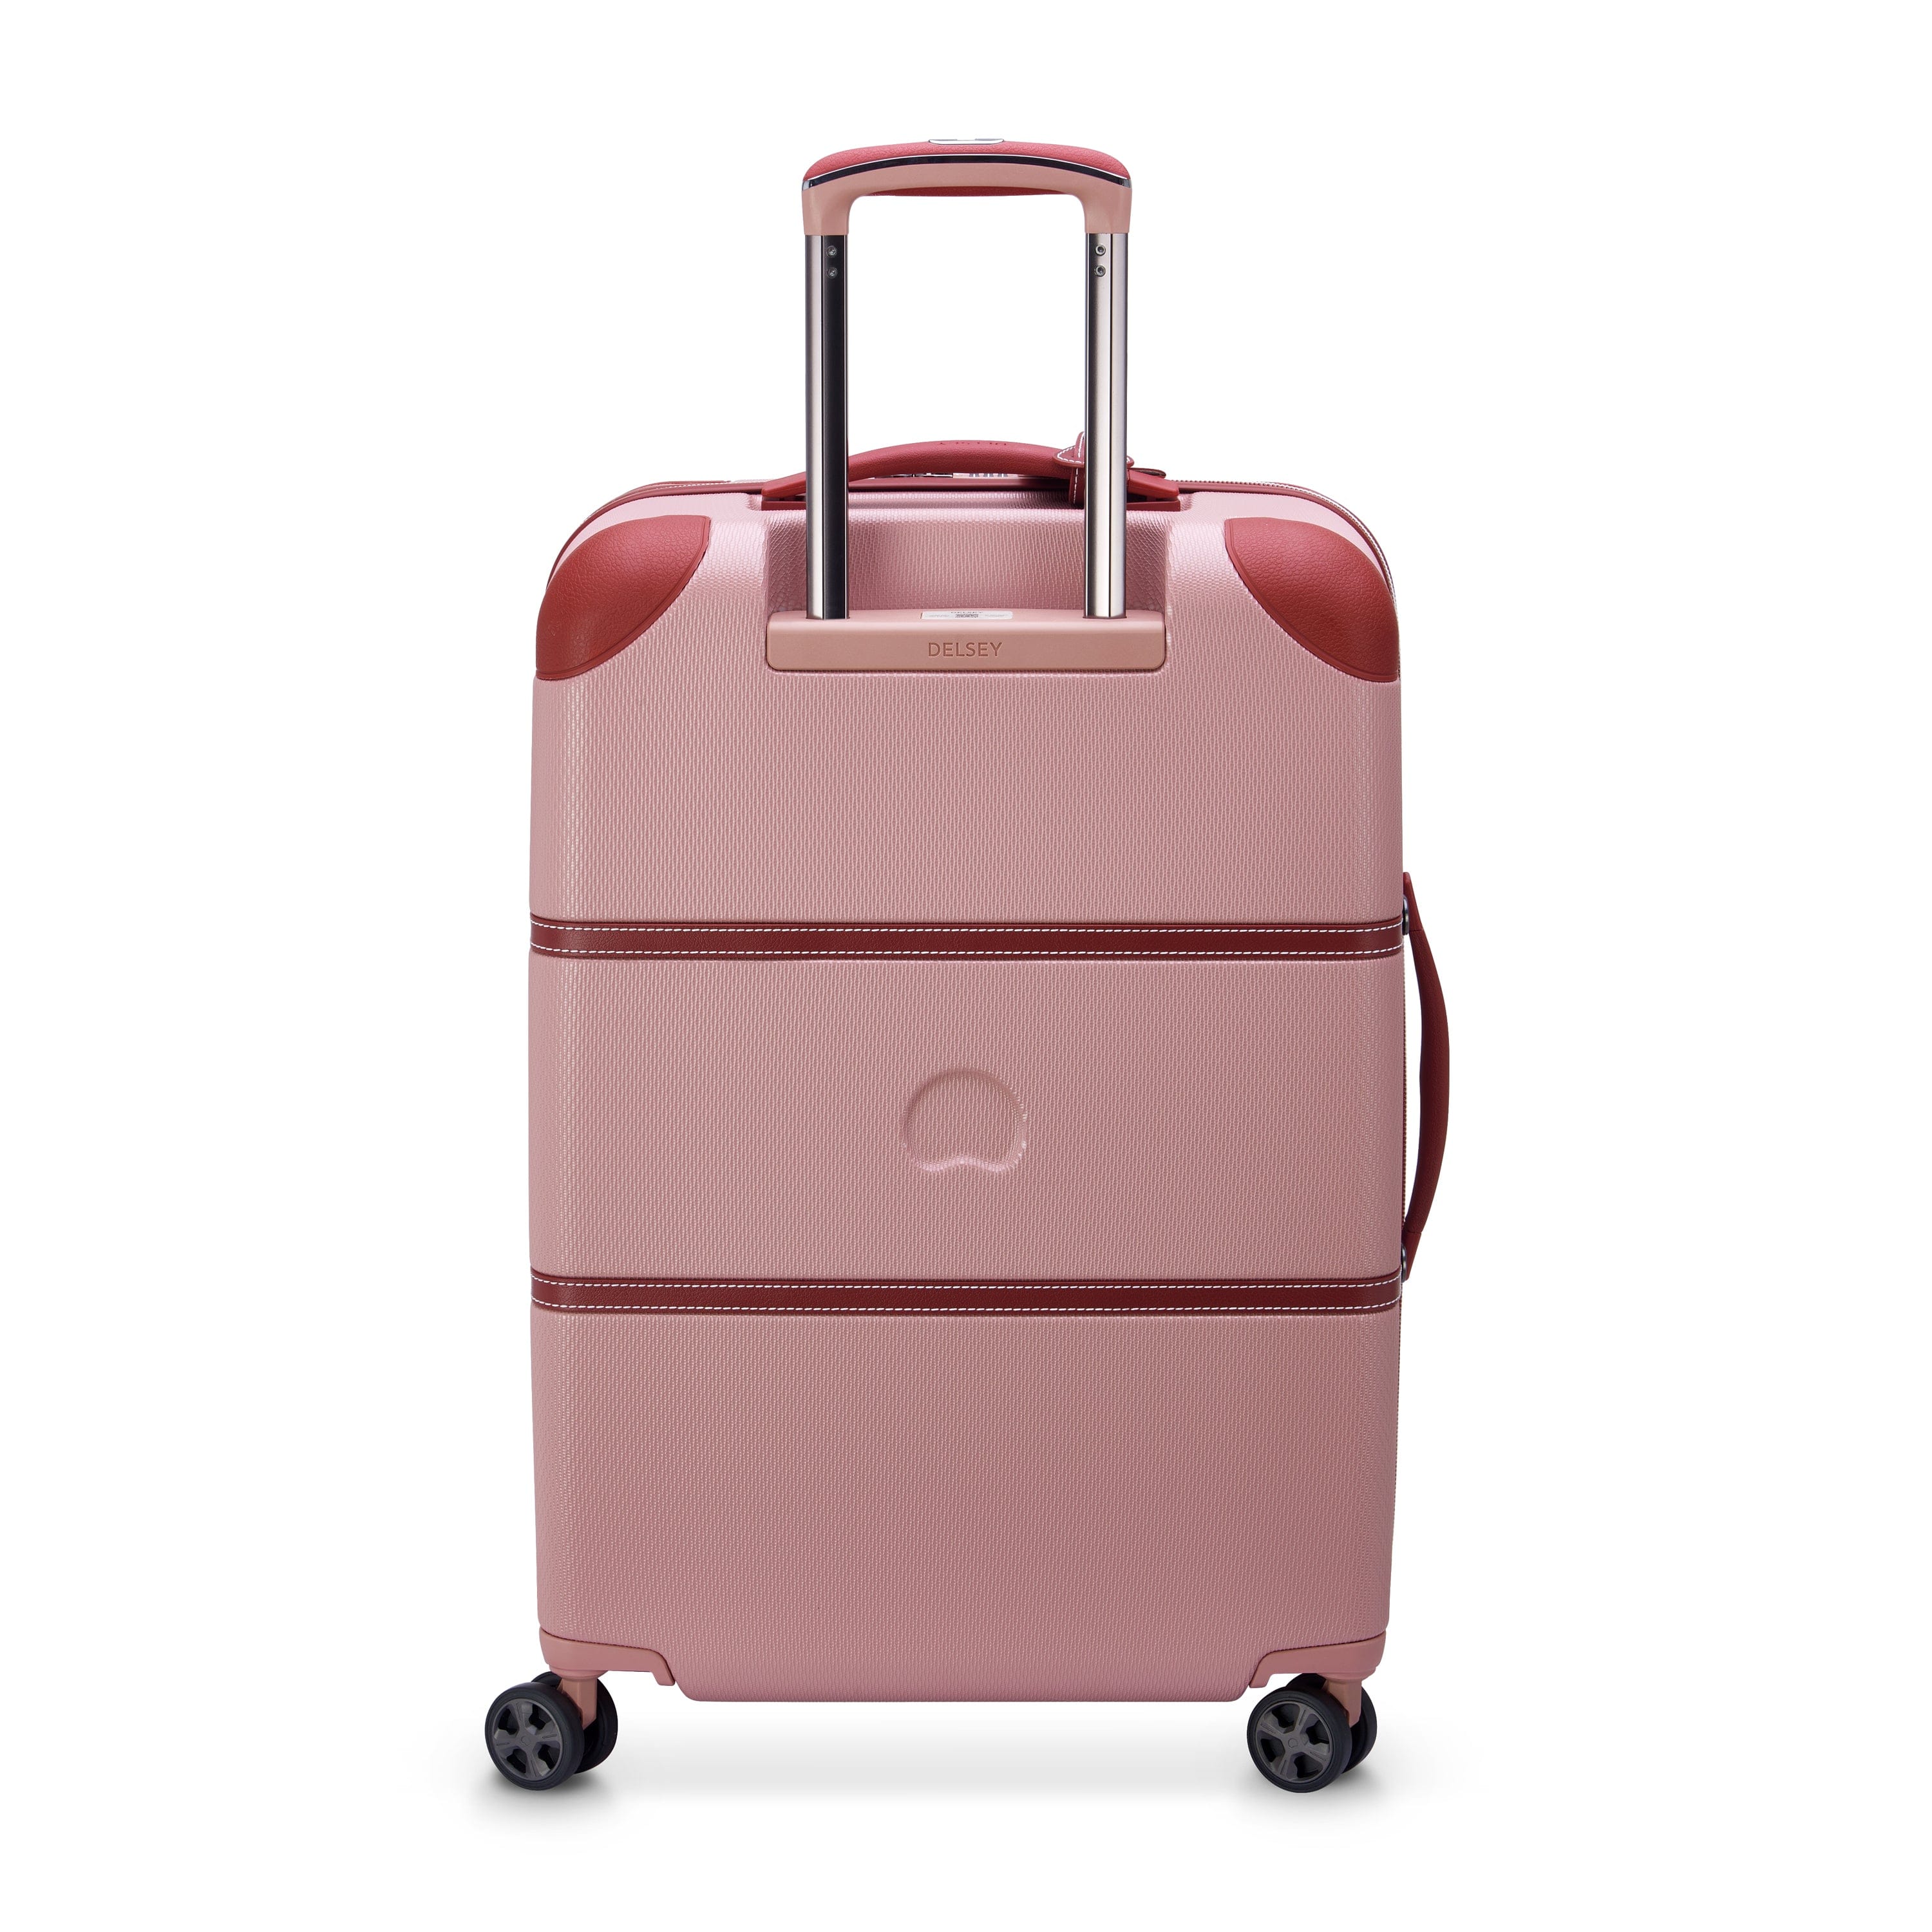 Delsey Chatelet Air 2.0 66cm Hardcase Trunk 4 Double Wheel Check-In Luggage Trolley Pink - 00167681009